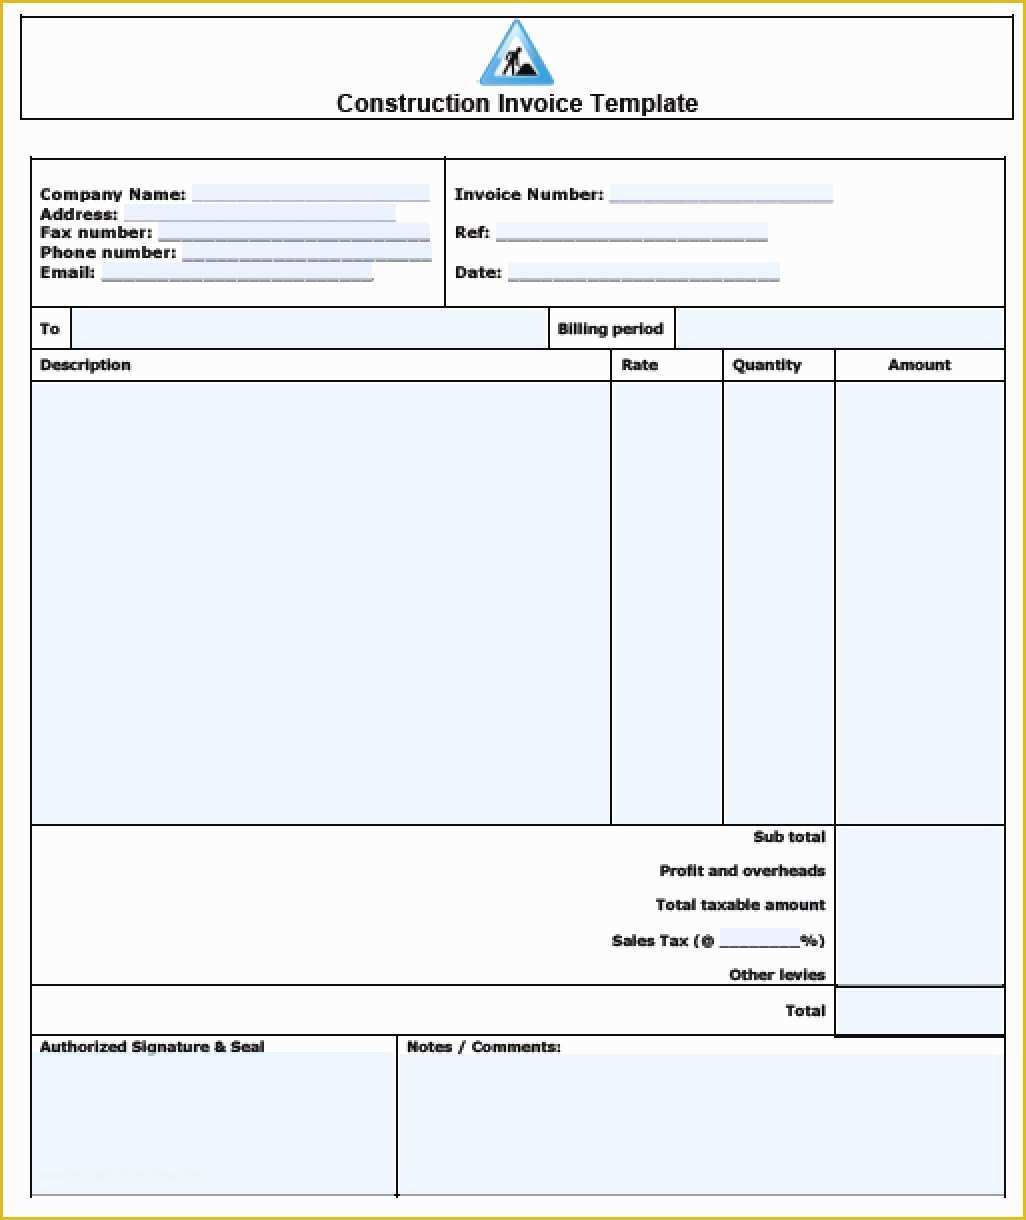 Construction Invoice Template Excel Free Of Labor Invoices Simplistic Free Construction Invoice